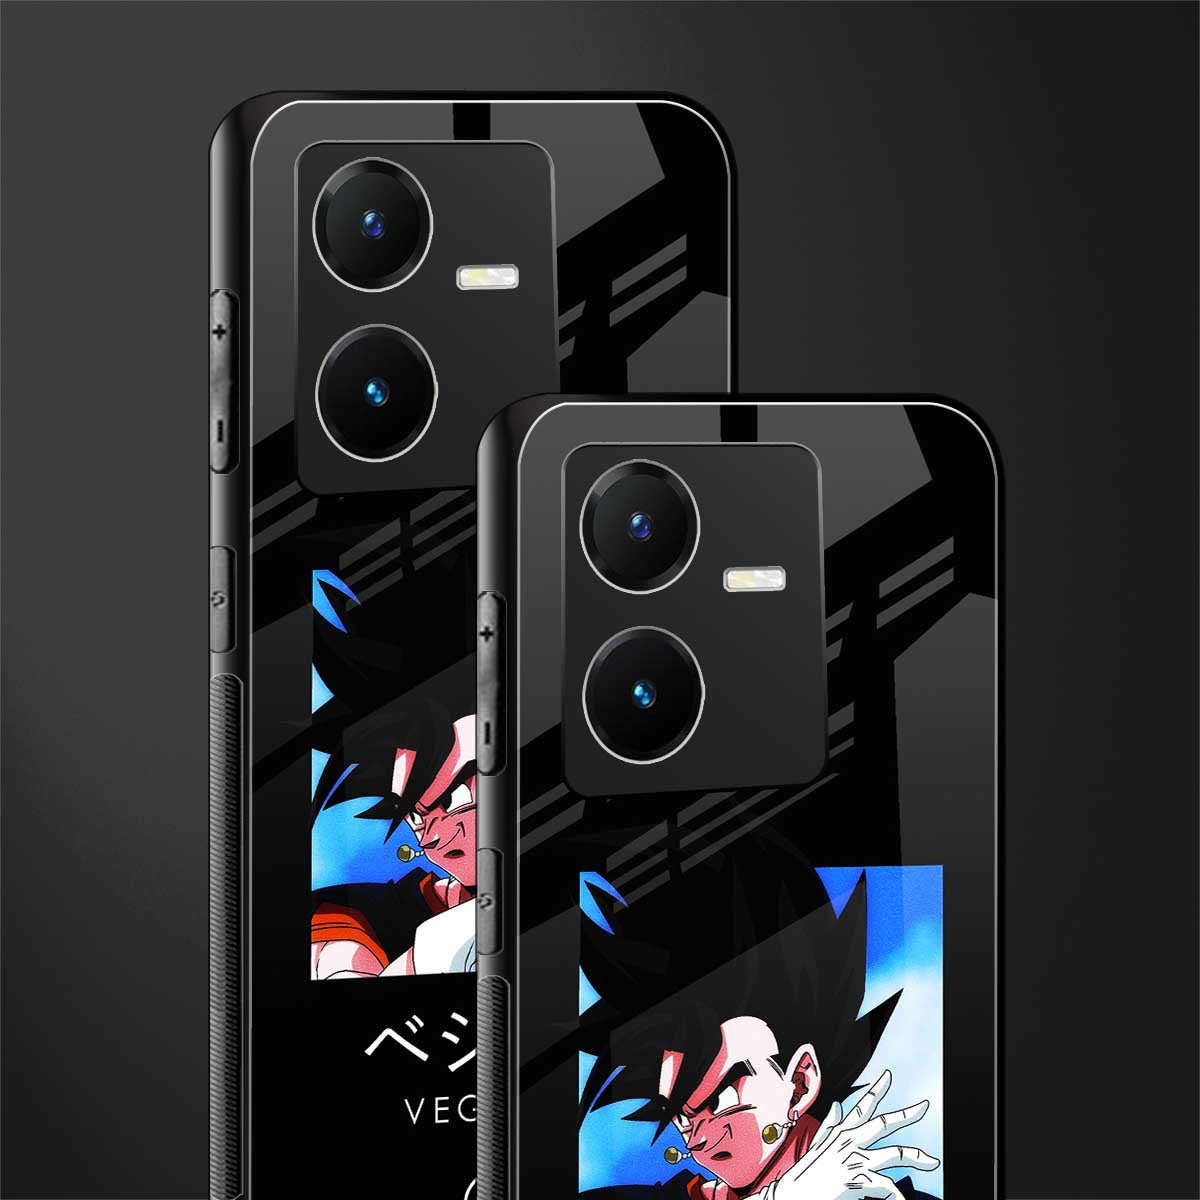 vegetto dragon ball z anime back phone cover | glass case for vivo y22